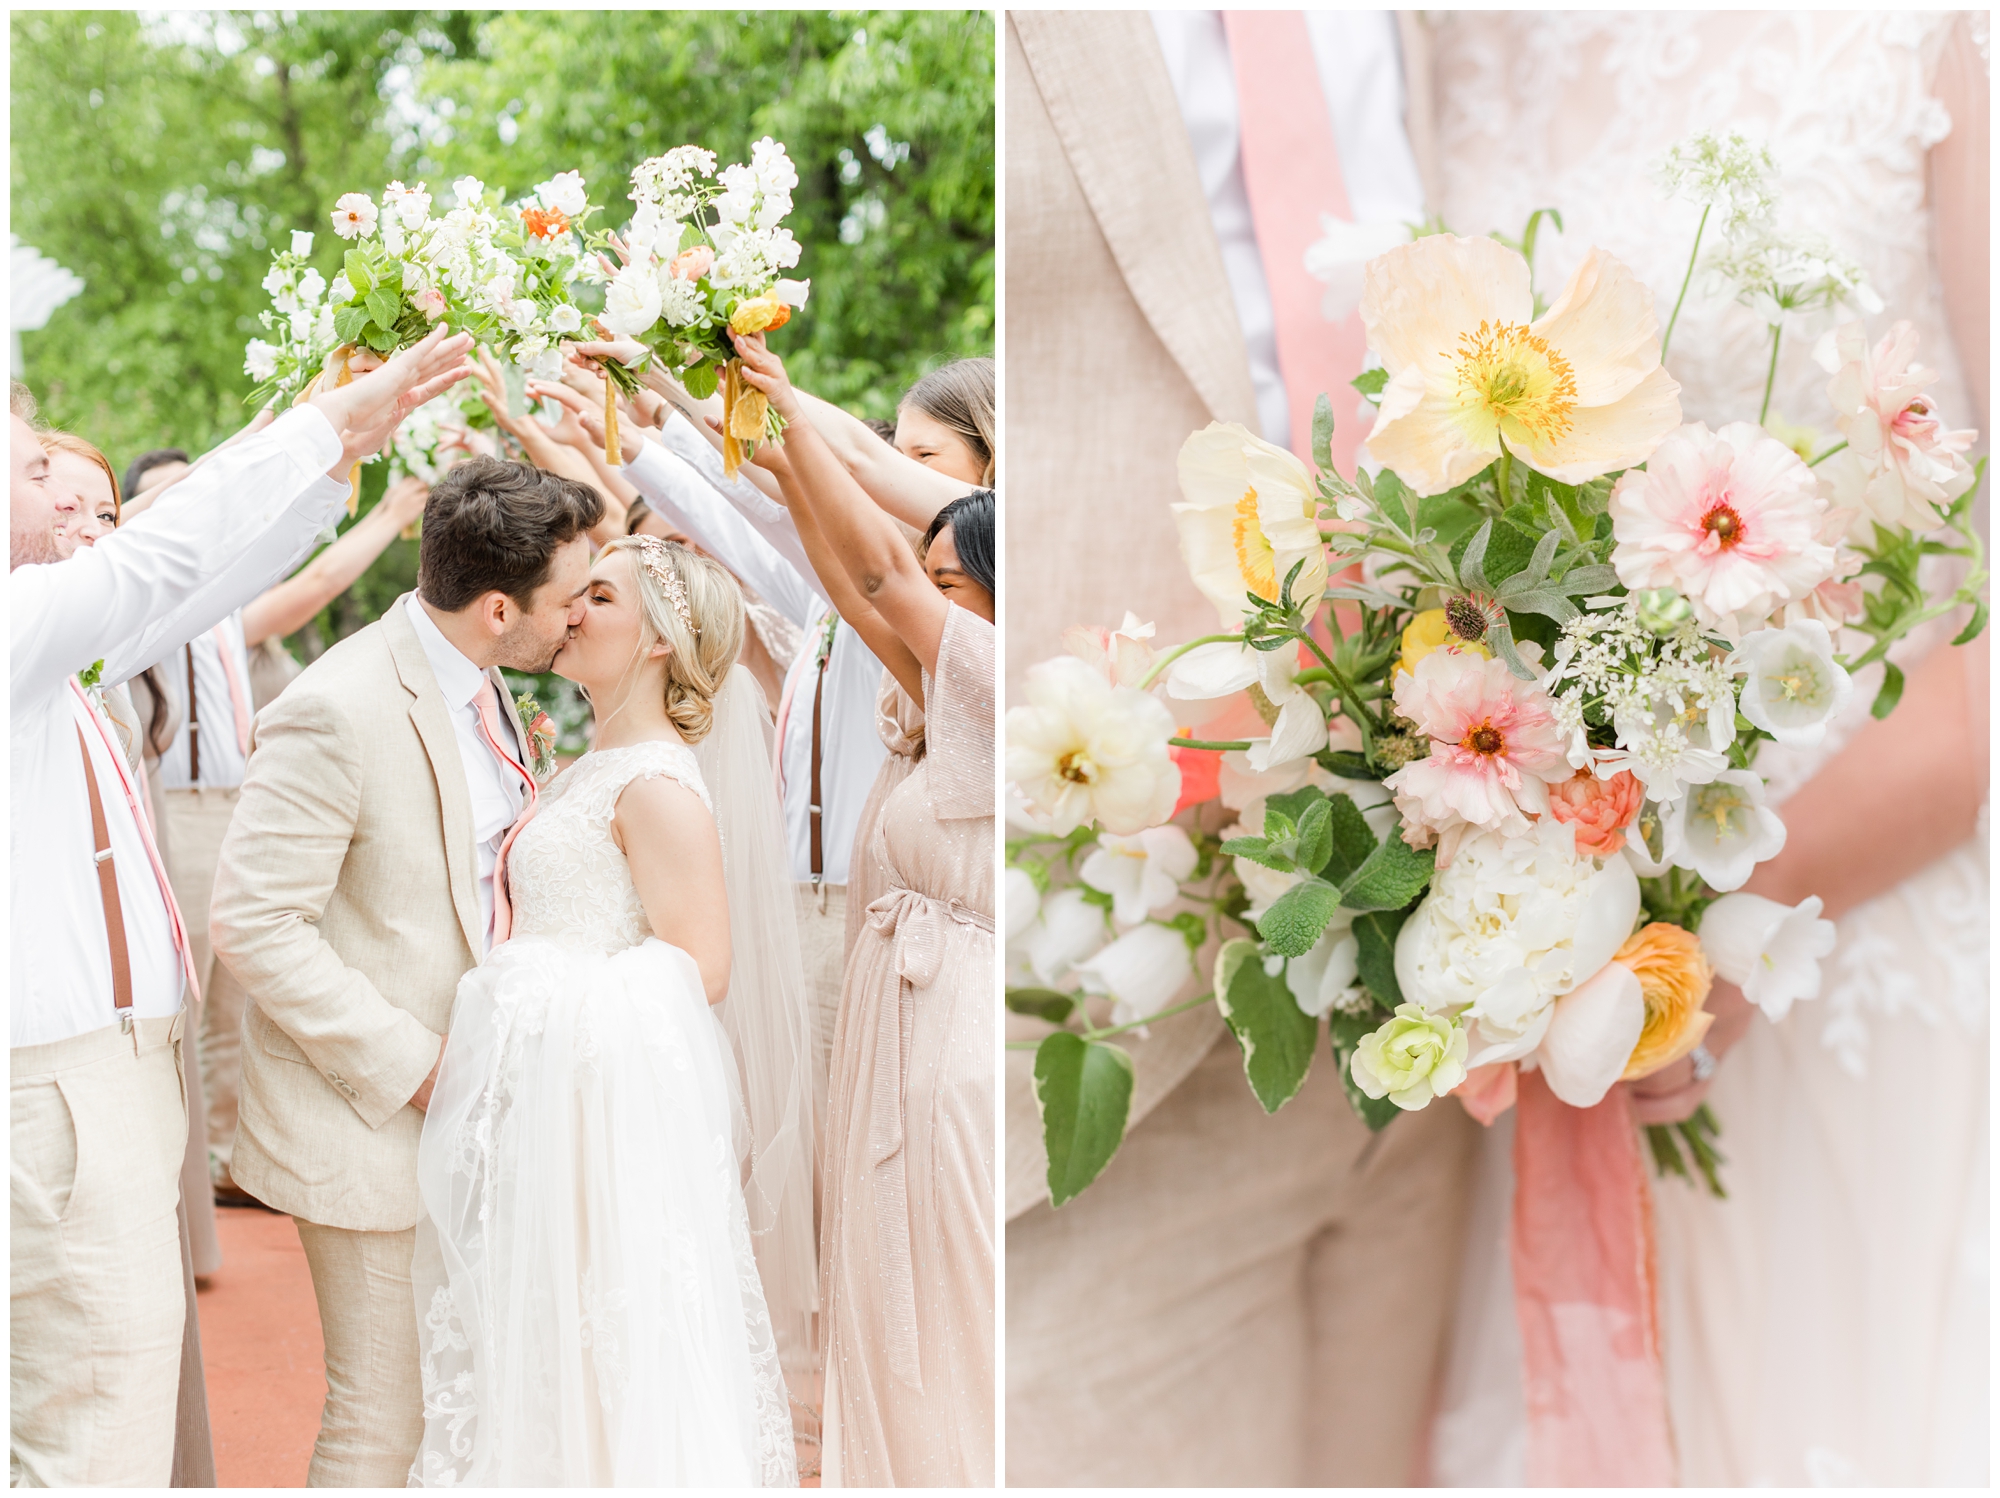 The bride and groom kiss in a portrait. Members of the wedding party are making an arch above them with their hands and the flowers. 